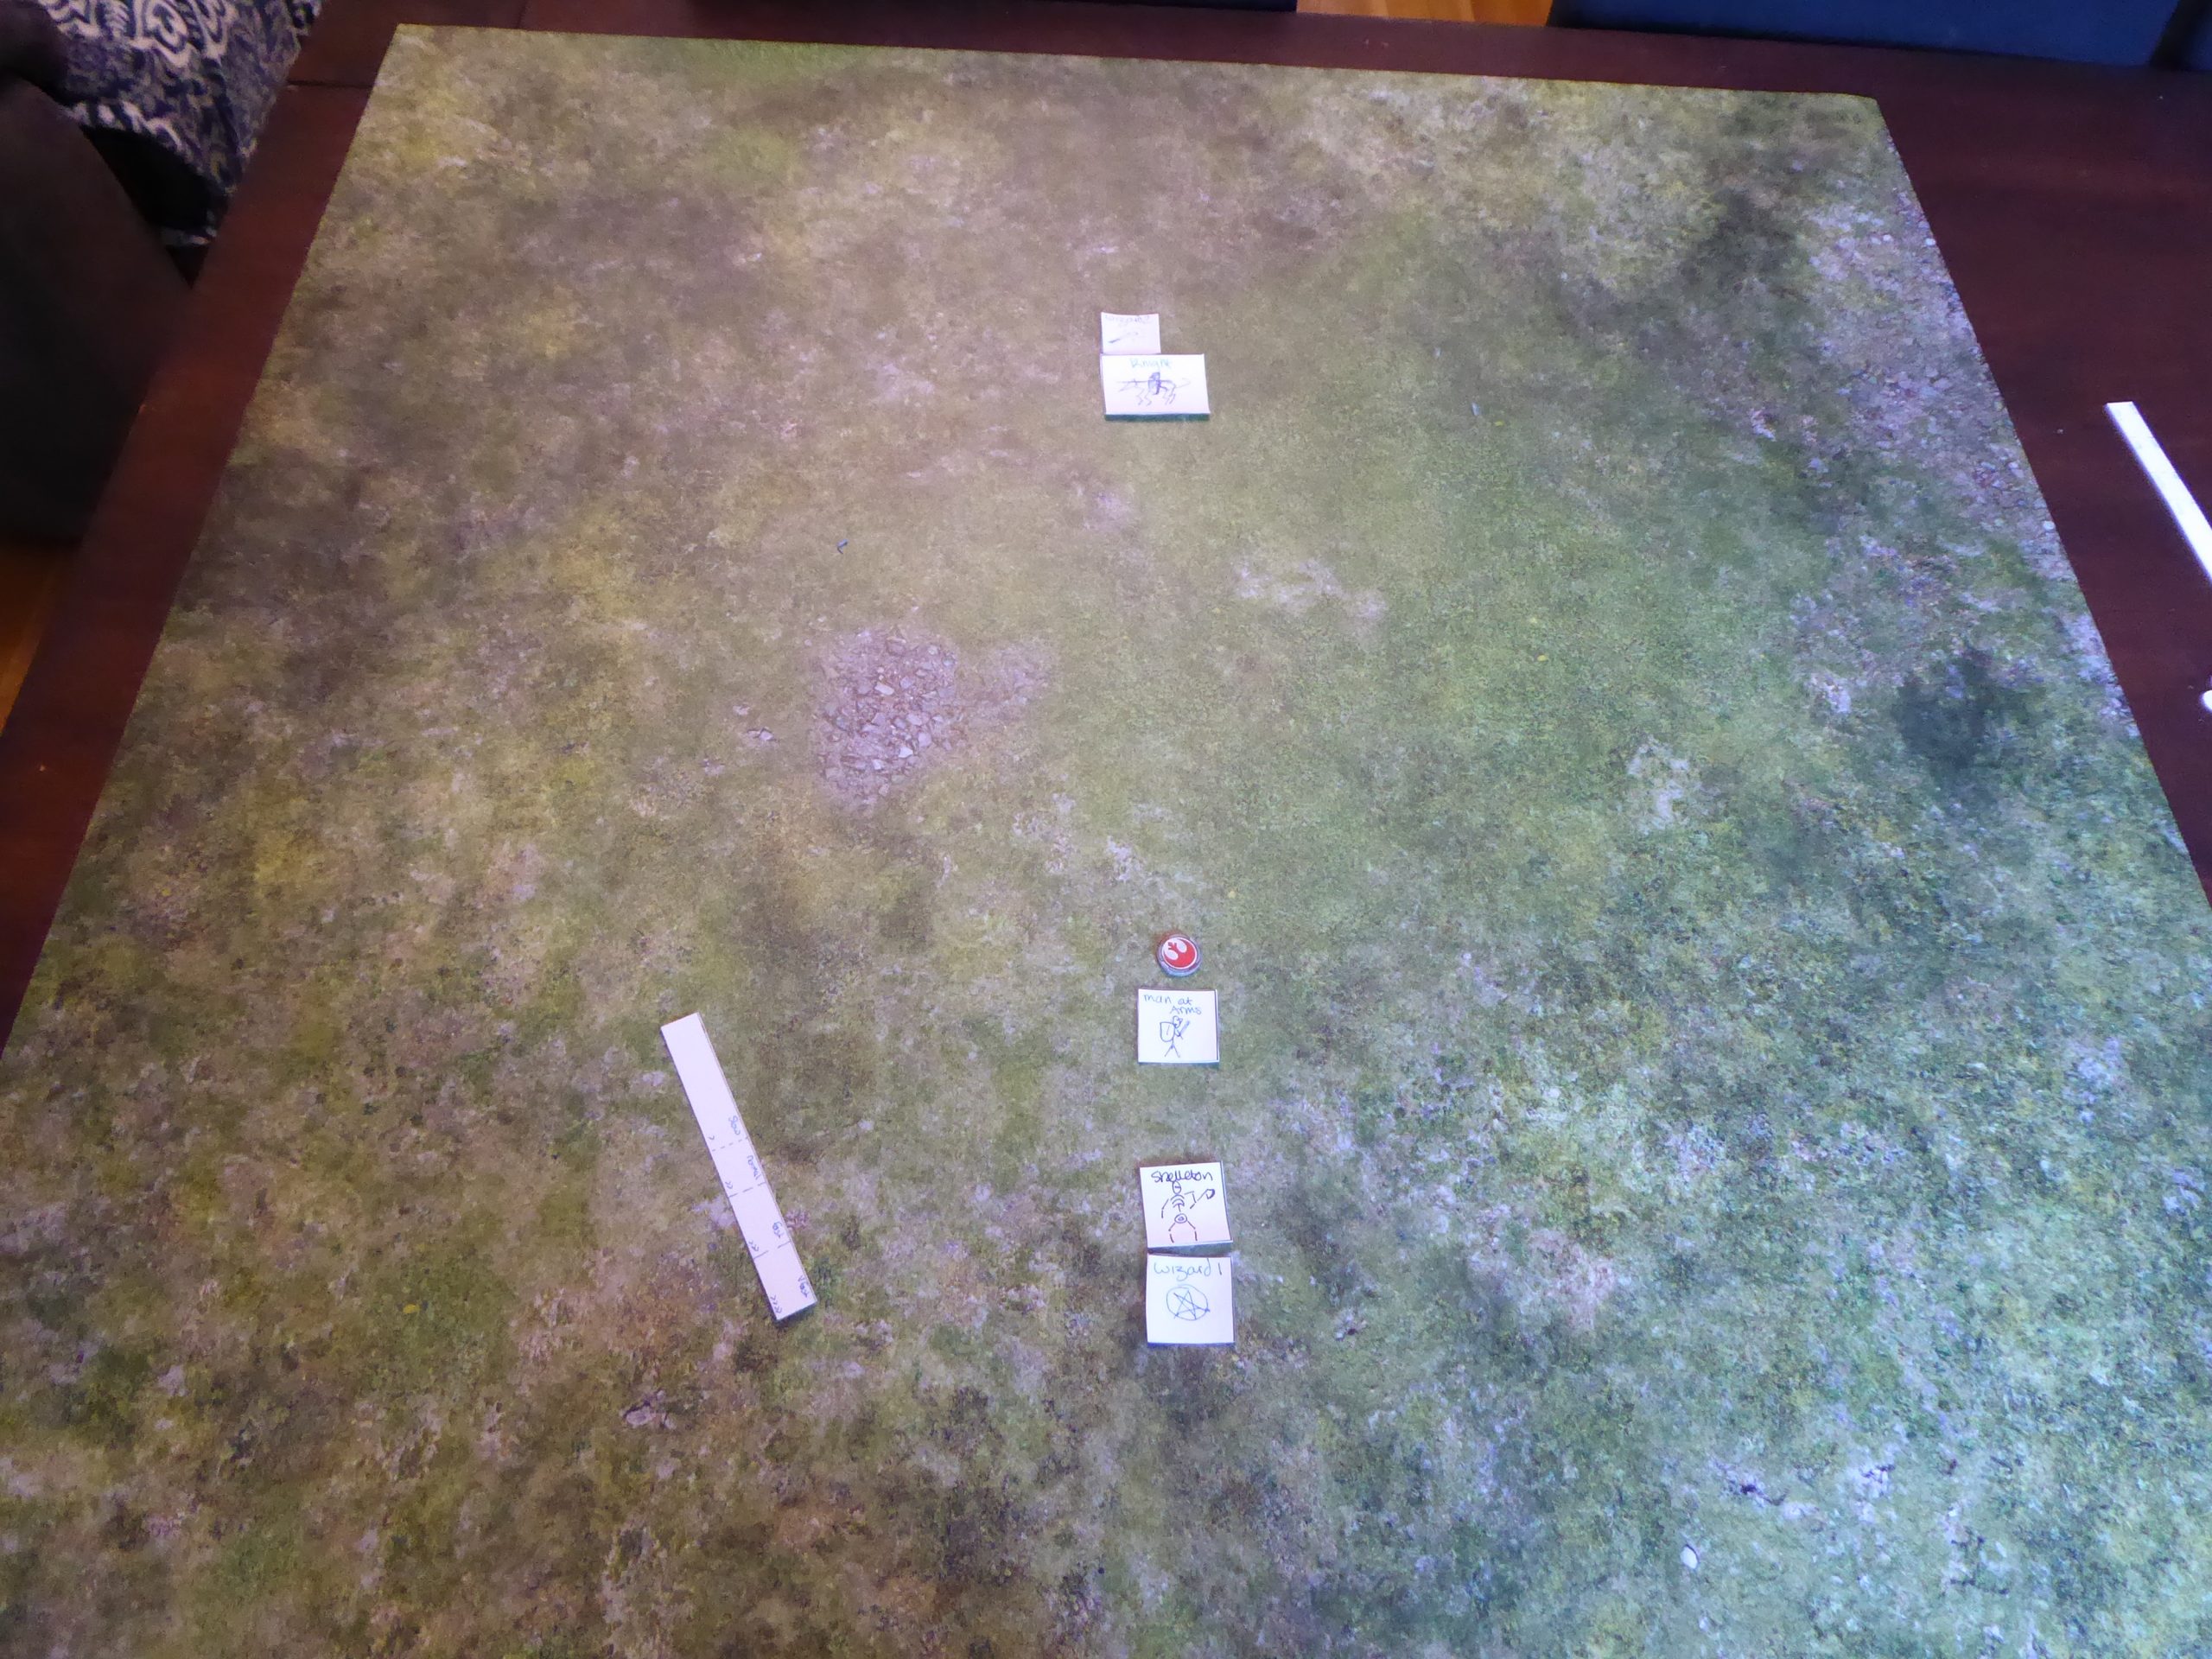 Photo showing the new sized game pieces and a range ruler